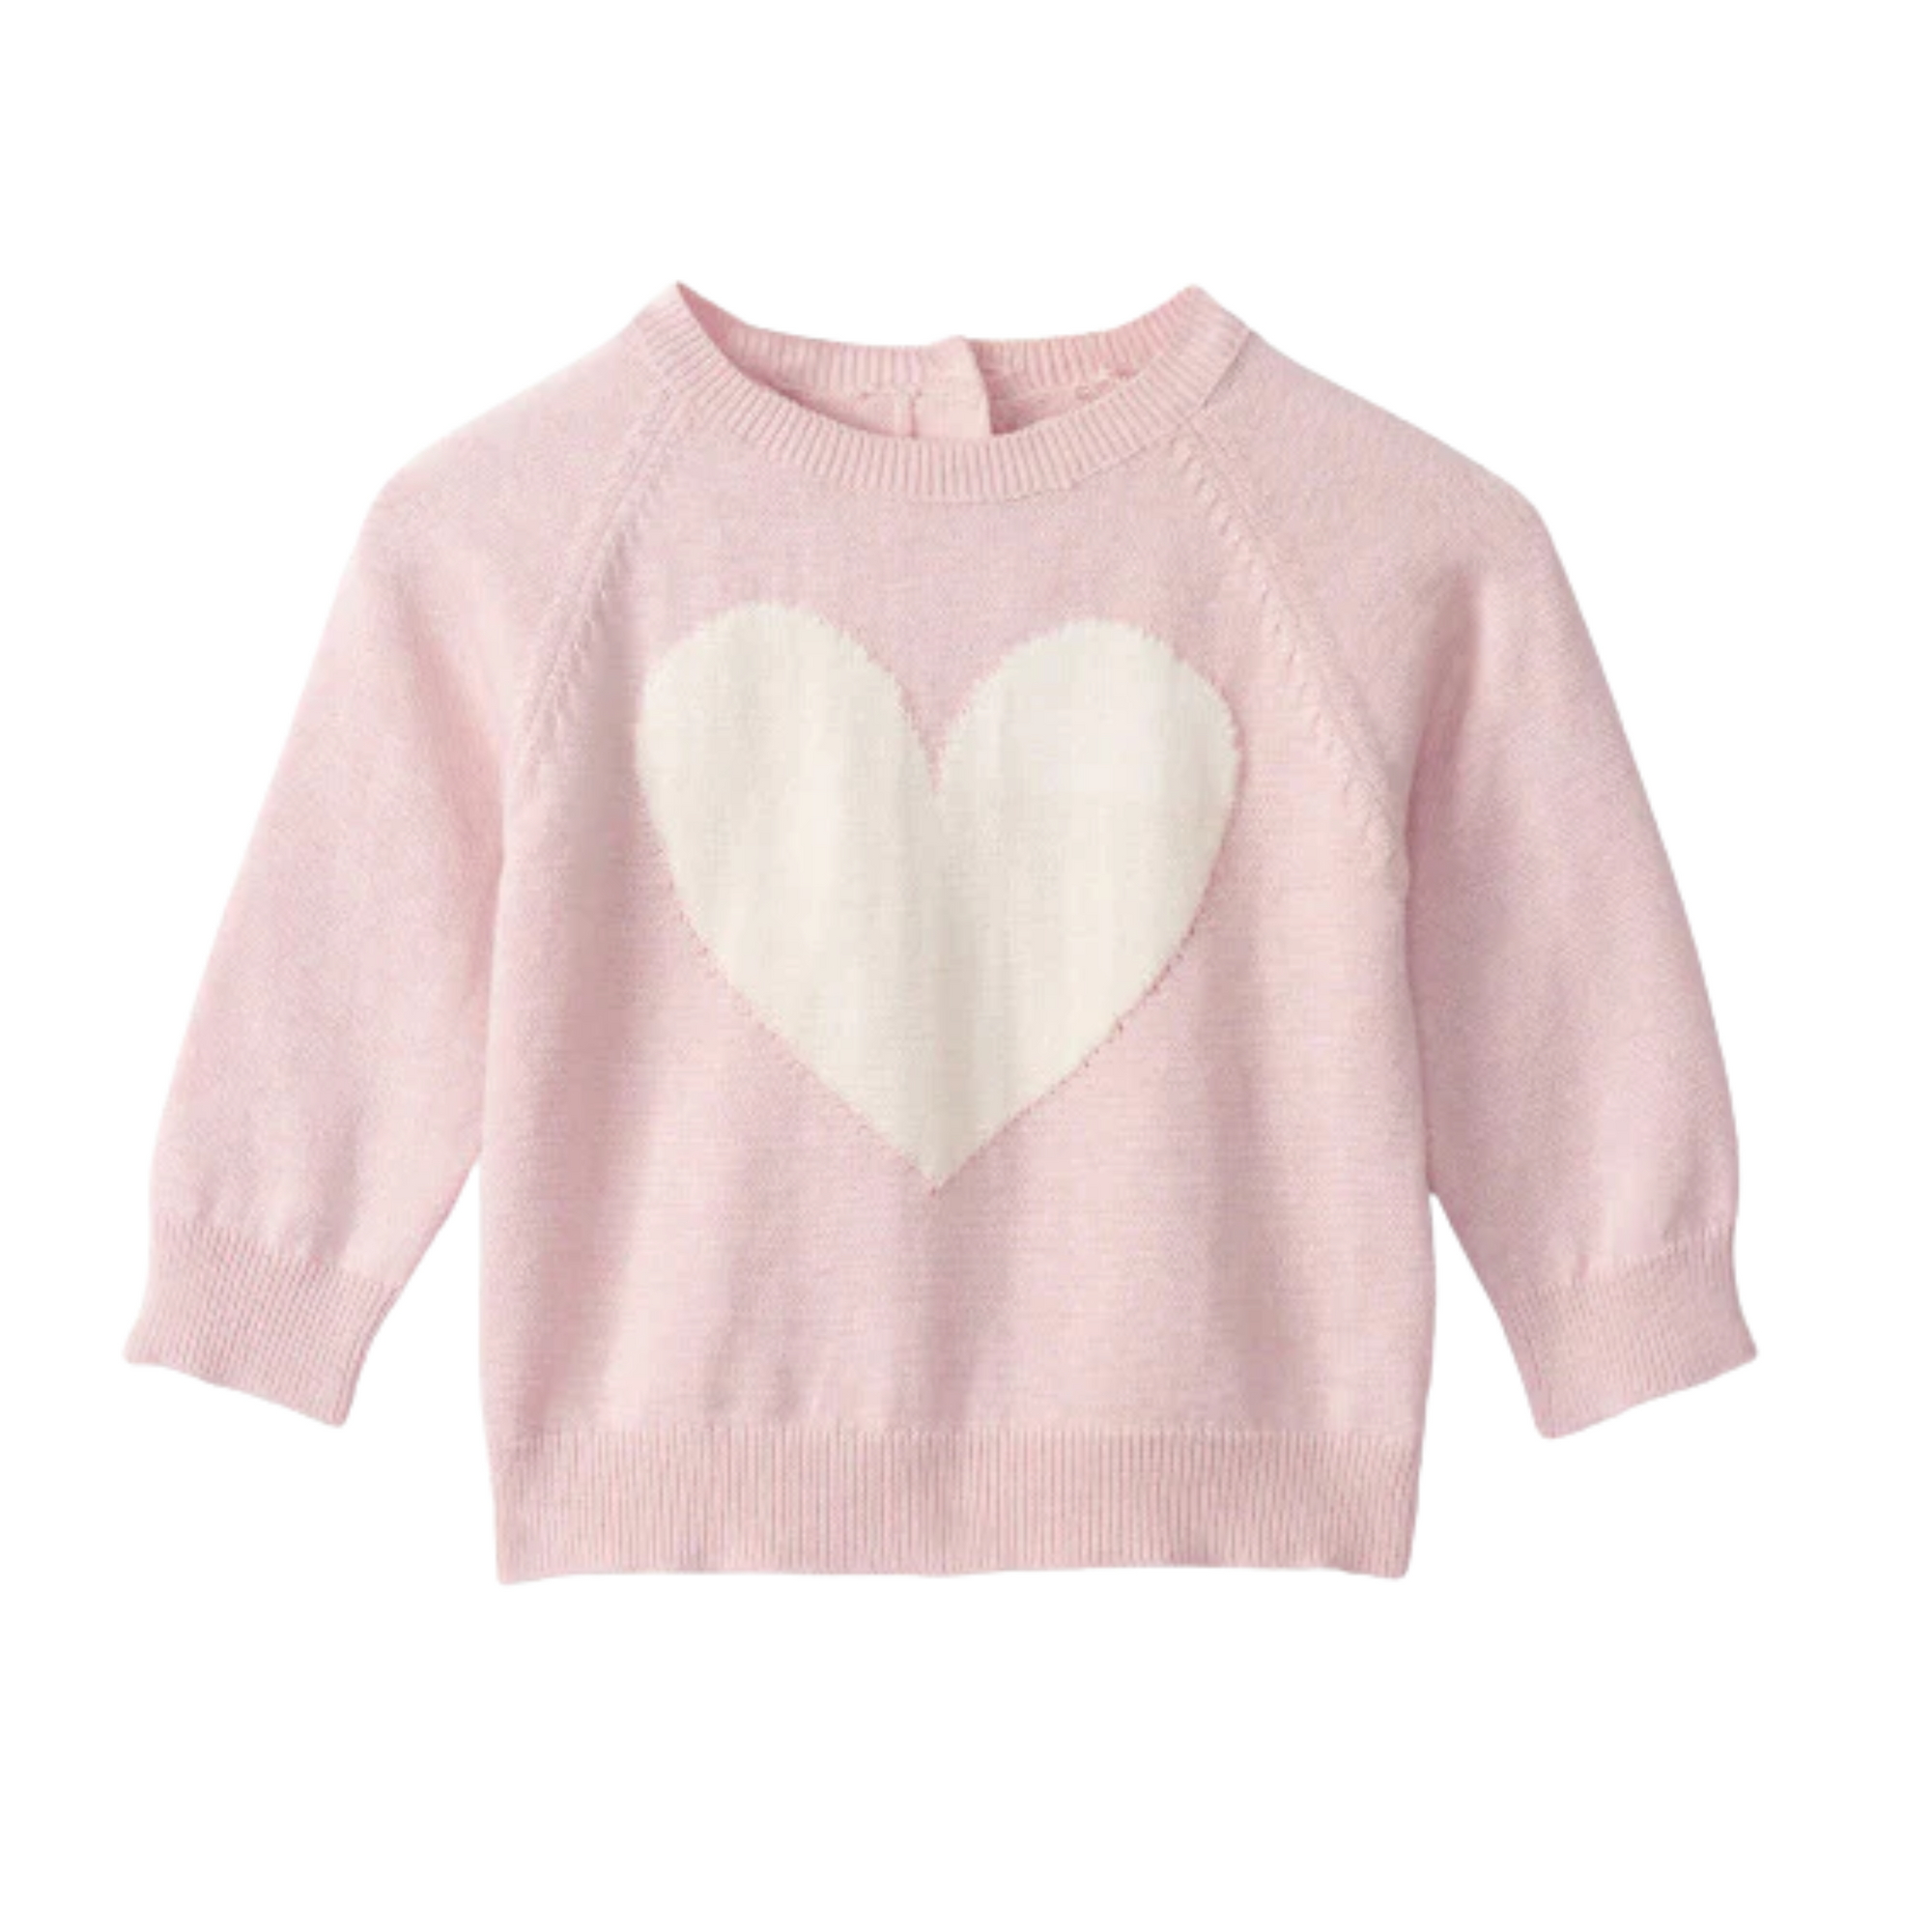 Hatley Sweet Heart Pull Over Sweater - Bridal Rose